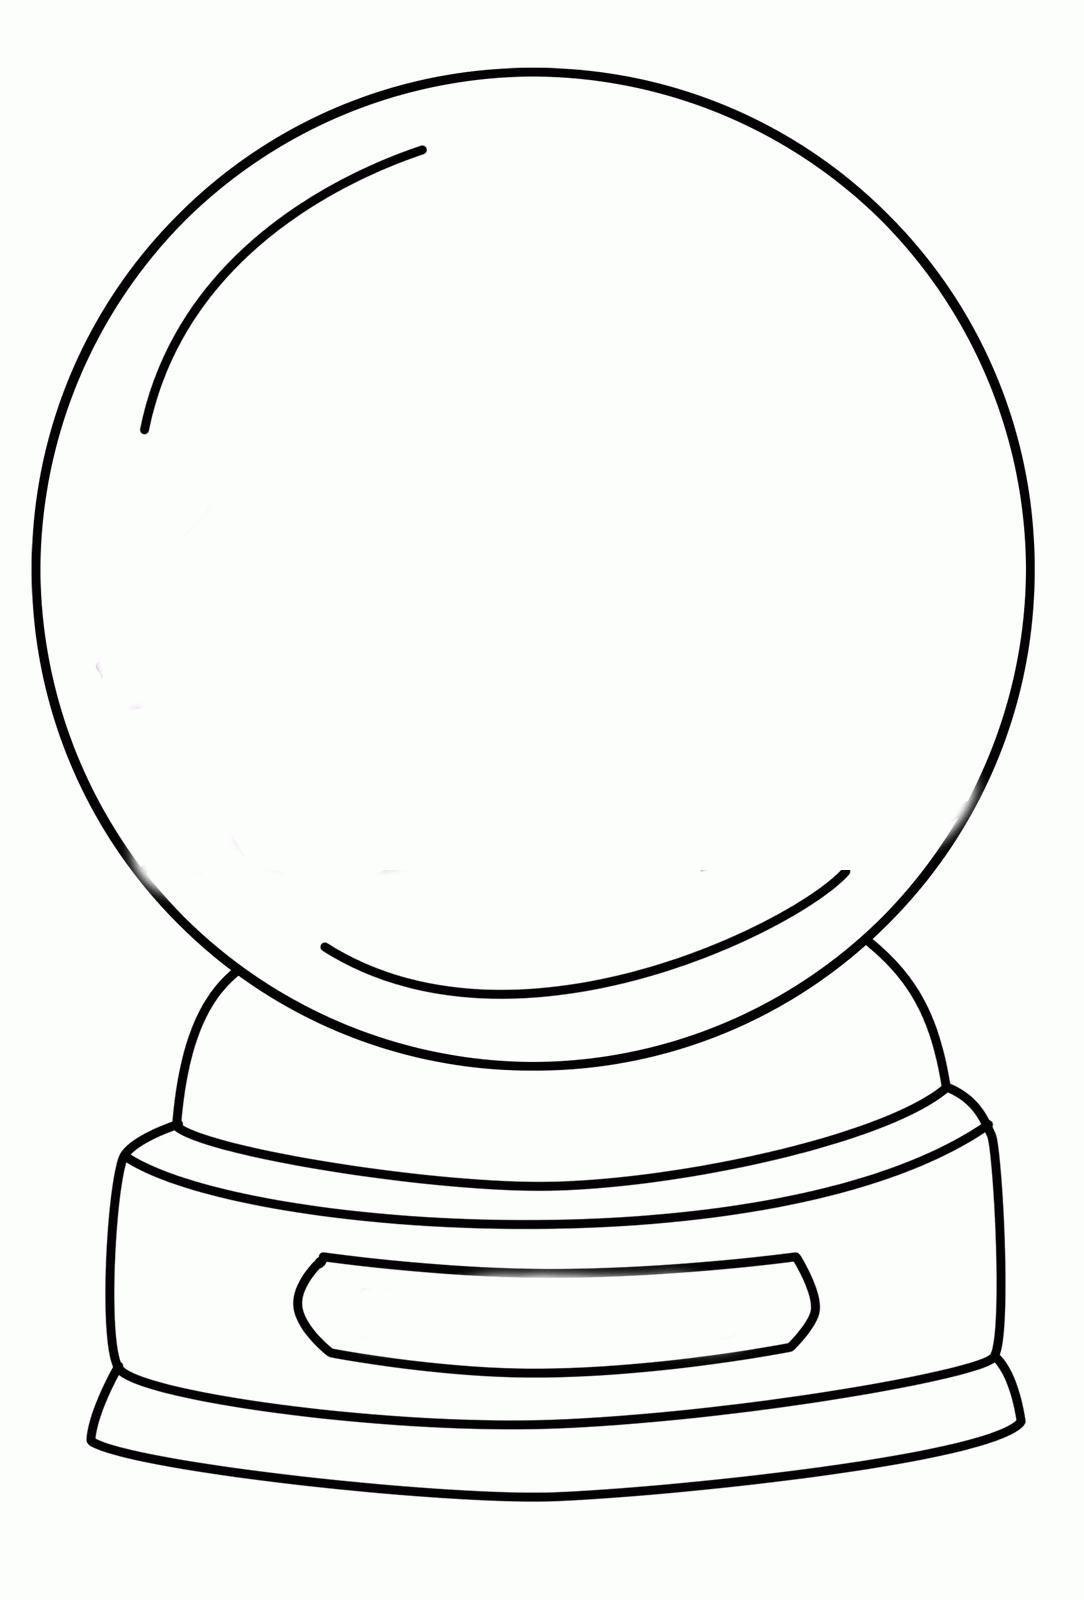 11 Pics Of Coloring Pages Snow Globe Winter Snow Globe Coloring